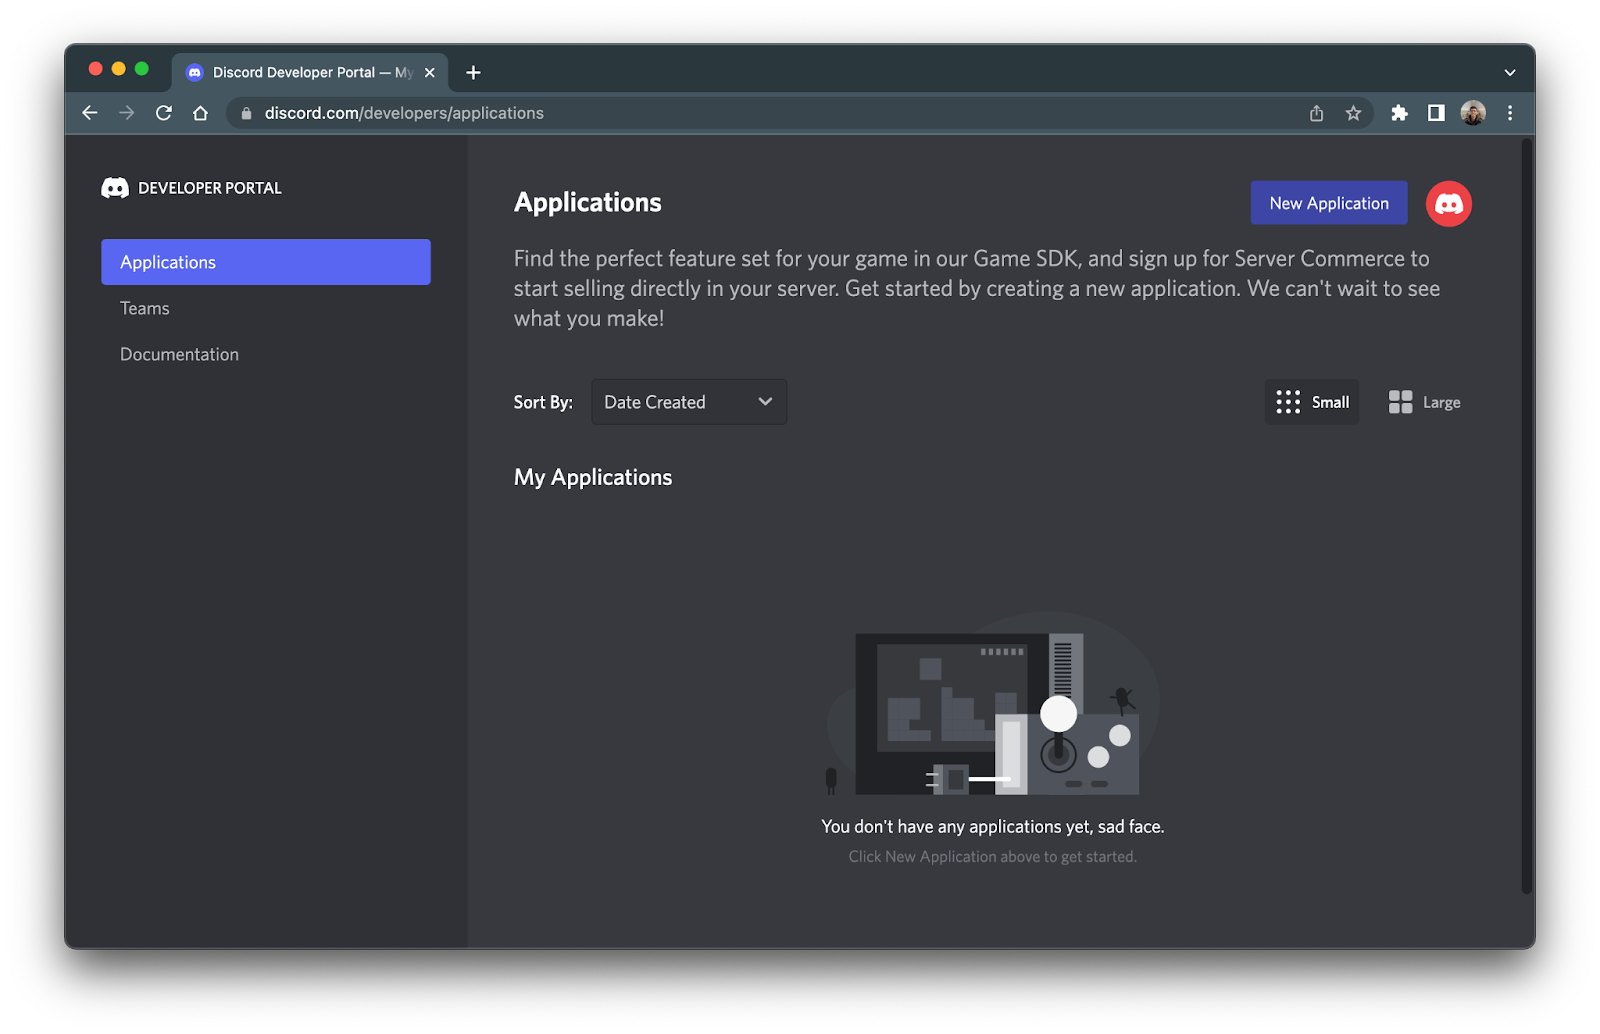 Applications page of the Discord Developer Dashboard